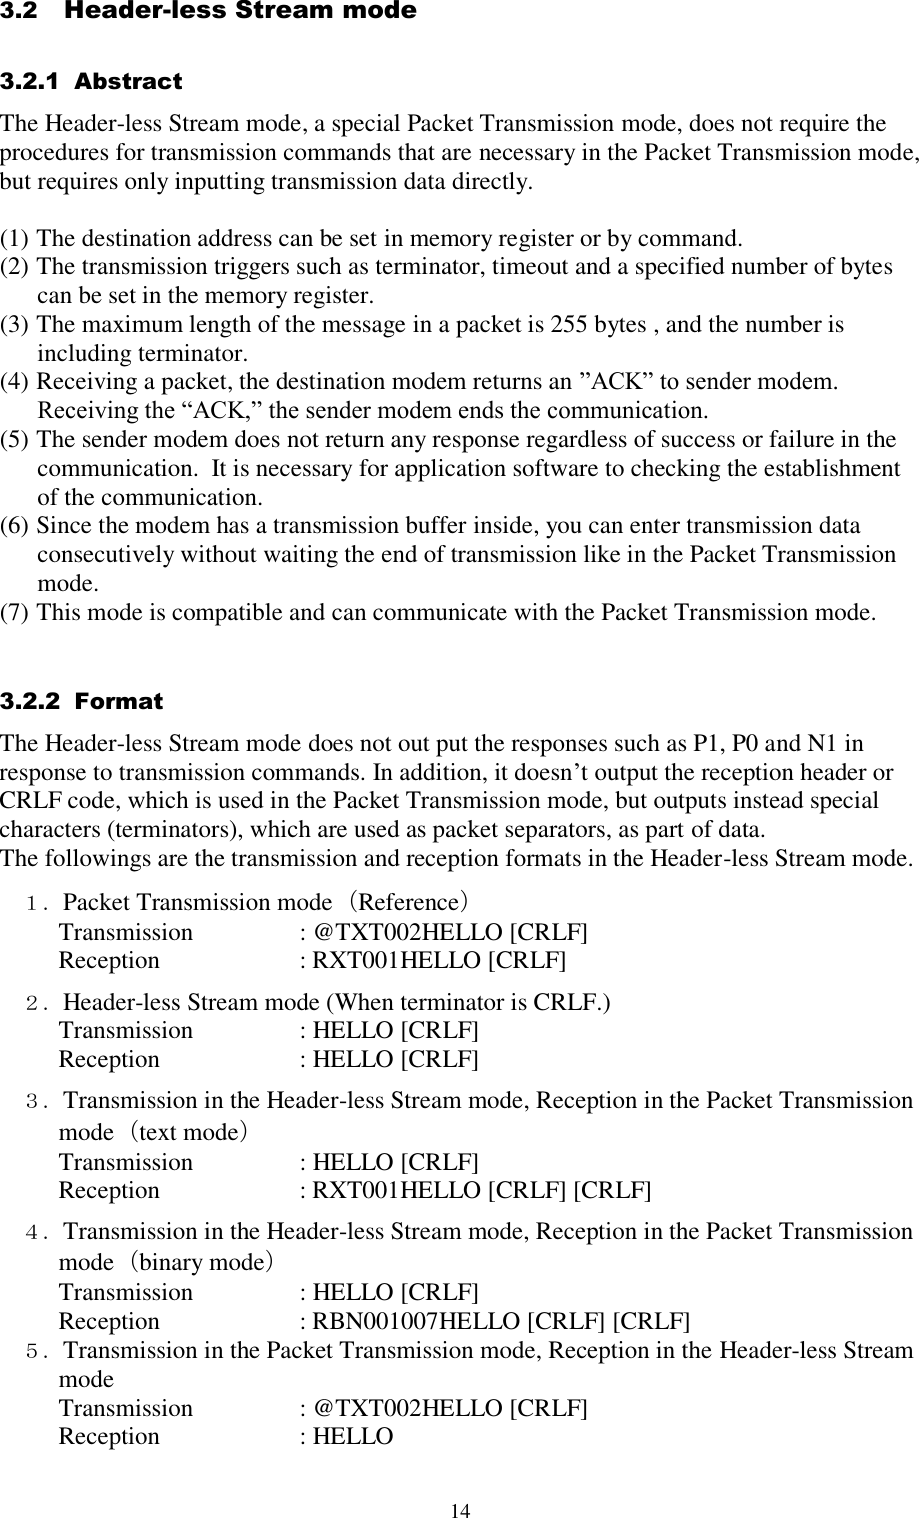  14 3.2   Header-less Stream mode  3.2.1  Abstract  The Header-less Stream mode, a special Packet Transmission mode, does not require the procedures for transmission commands that are necessary in the Packet Transmission mode, but requires only inputting transmission data directly.  (1) The destination address can be set in memory register or by command.  (2) The transmission triggers such as terminator, timeout and a specified number of bytes can be set in the memory register.  (3) The maximum length of the message in a packet is 255 bytes , and the number is including terminator. (4) Receiving a packet, the destination modem returns an ”ACK” to sender modem. Receiving the “ACK,” the sender modem ends the communication. (5) The sender modem does not return any response regardless of success or failure in the communication.  It is necessary for application software to checking the establishment of the communication. (6) Since the modem has a transmission buffer inside, you can enter transmission data consecutively without waiting the end of transmission like in the Packet Transmission mode. (7) This mode is compatible and can communicate with the Packet Transmission mode.   3.2.2  Format  The Header-less Stream mode does not out put the responses such as P1, P0 and N1 in response to transmission commands. In addition, it doesn’t output the reception header or CRLF code, which is used in the Packet Transmission mode, but outputs instead special characters (terminators), which are used as packet separators, as part of data.   The followings are the transmission and reception formats in the Header-less Stream mode. １．Packet Transmission mode（Reference） Transmission    : @TXT002HELLO [CRLF] Reception     : RXT001HELLO [CRLF] ２．Header-less Stream mode (When terminator is CRLF.) Transmission    : HELLO [CRLF] Reception     : HELLO [CRLF]  ３．Transmission in the Header-less Stream mode, Reception in the Packet Transmission mode（text mode） Transmission    : HELLO [CRLF] Reception     : RXT001HELLO [CRLF] [CRLF] ４．Transmission in the Header-less Stream mode, Reception in the Packet Transmission mode（binary mode） Transmission    : HELLO [CRLF] Reception     : RBN001007HELLO [CRLF] [CRLF] ５．Transmission in the Packet Transmission mode, Reception in the Header-less Stream mode Transmission    : @TXT002HELLO [CRLF] Reception     : HELLO   